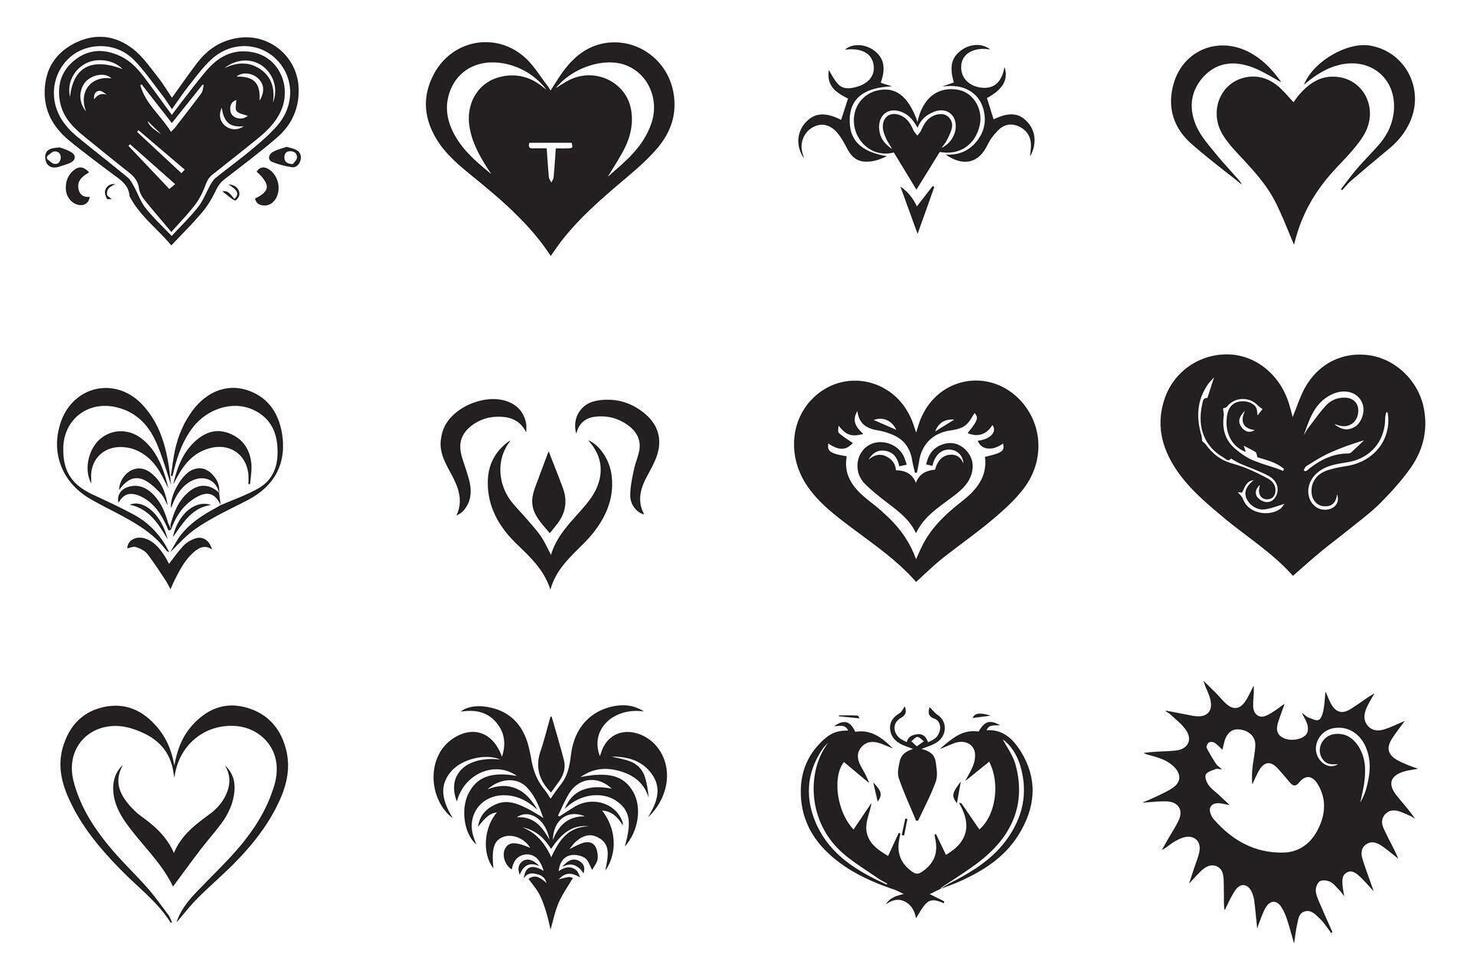 Hearts silhouette icon bundle collection pro vector